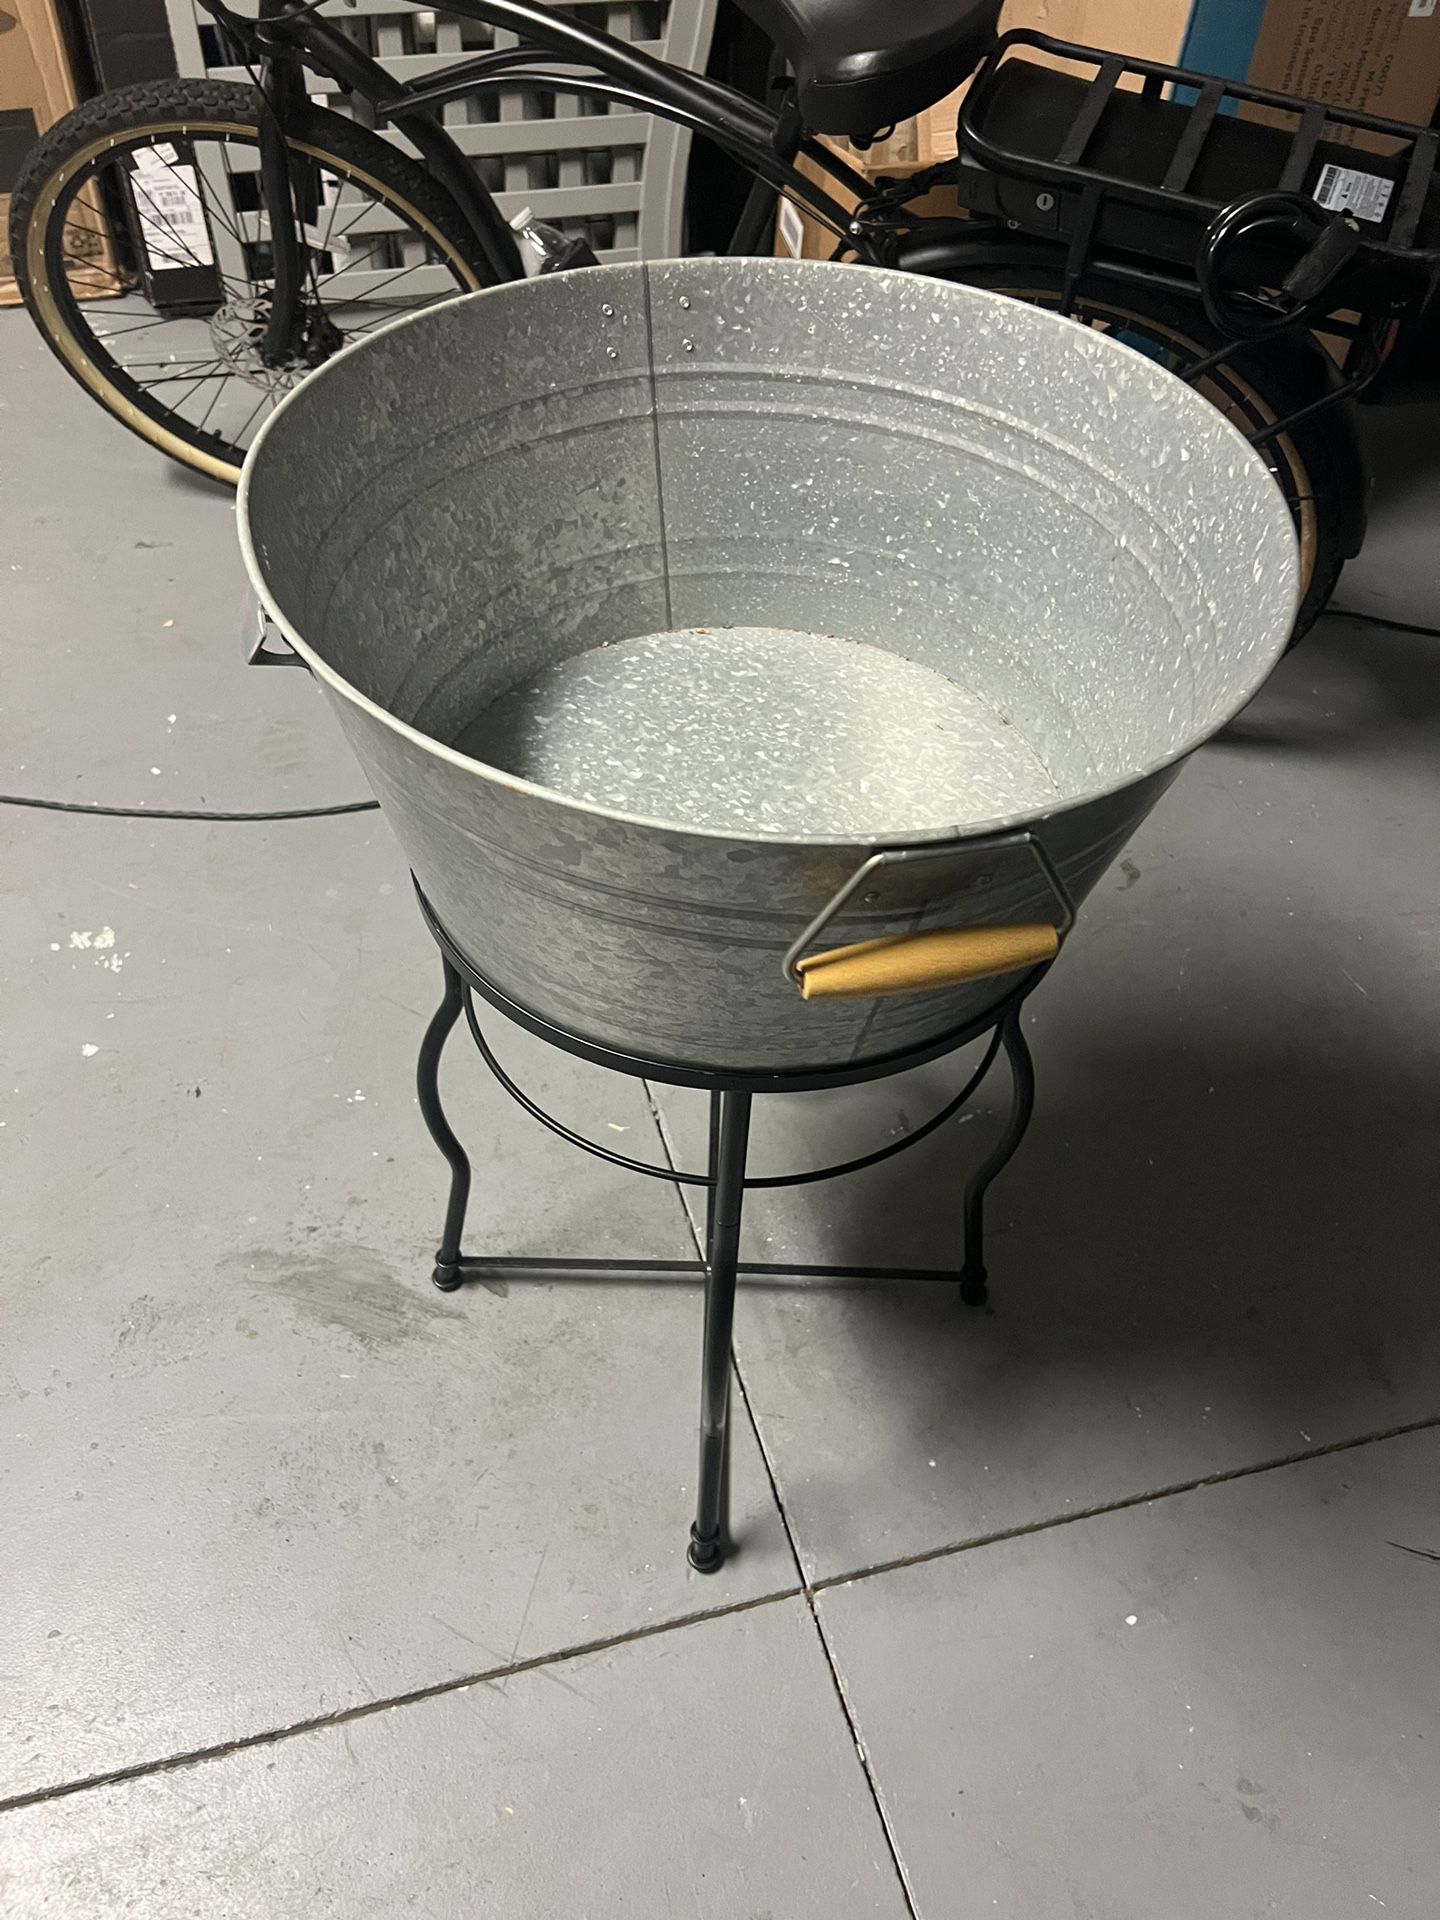 Large Beverage / Ice Tub w/ Stand